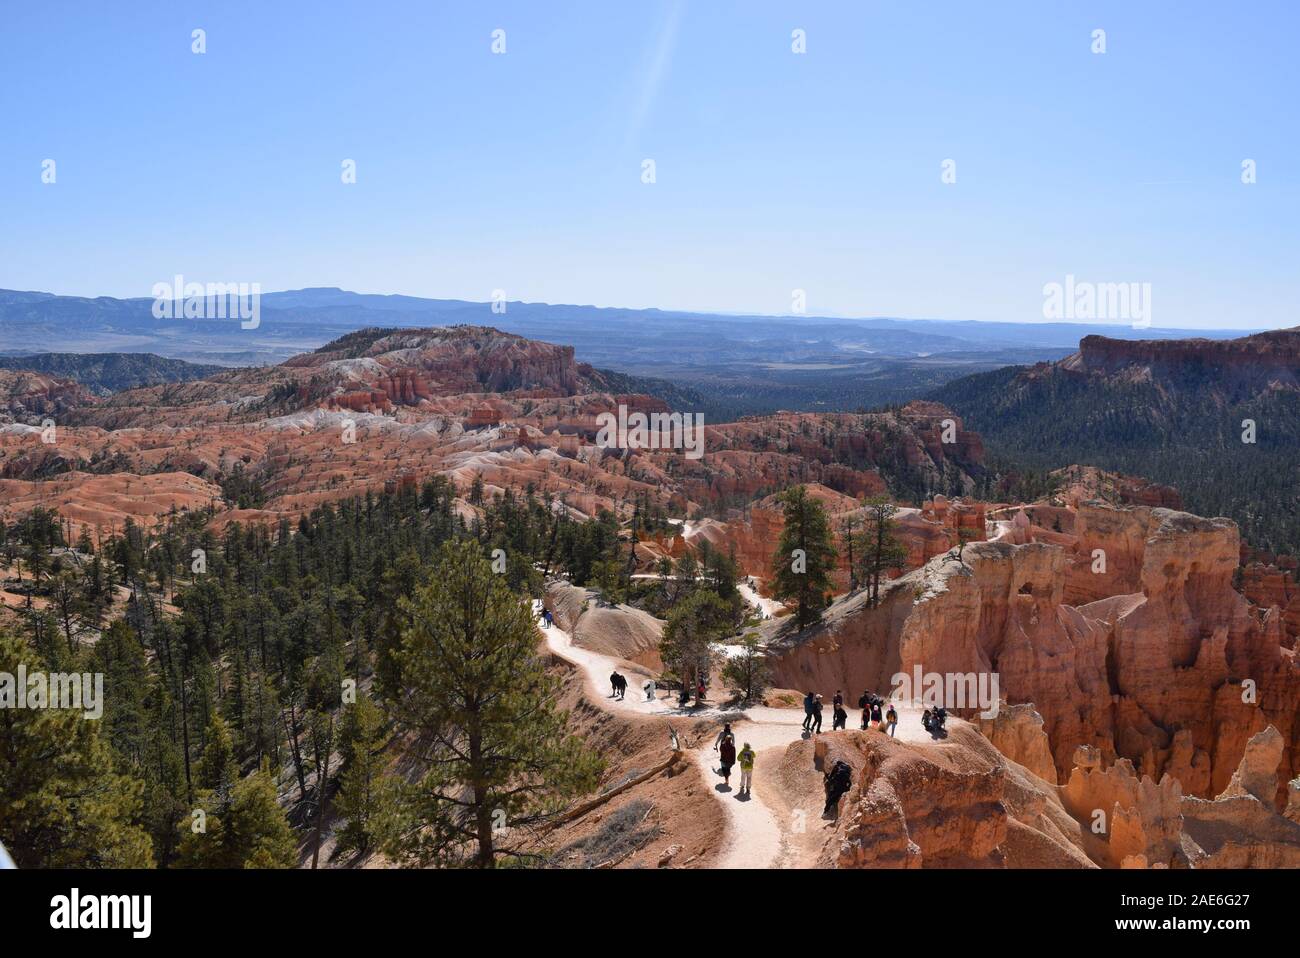 Hikers on the Queen's Garden Trail, which takes visitors through fields of hoodoos on the main rim of Bryce Canyon National Park. Stock Photo